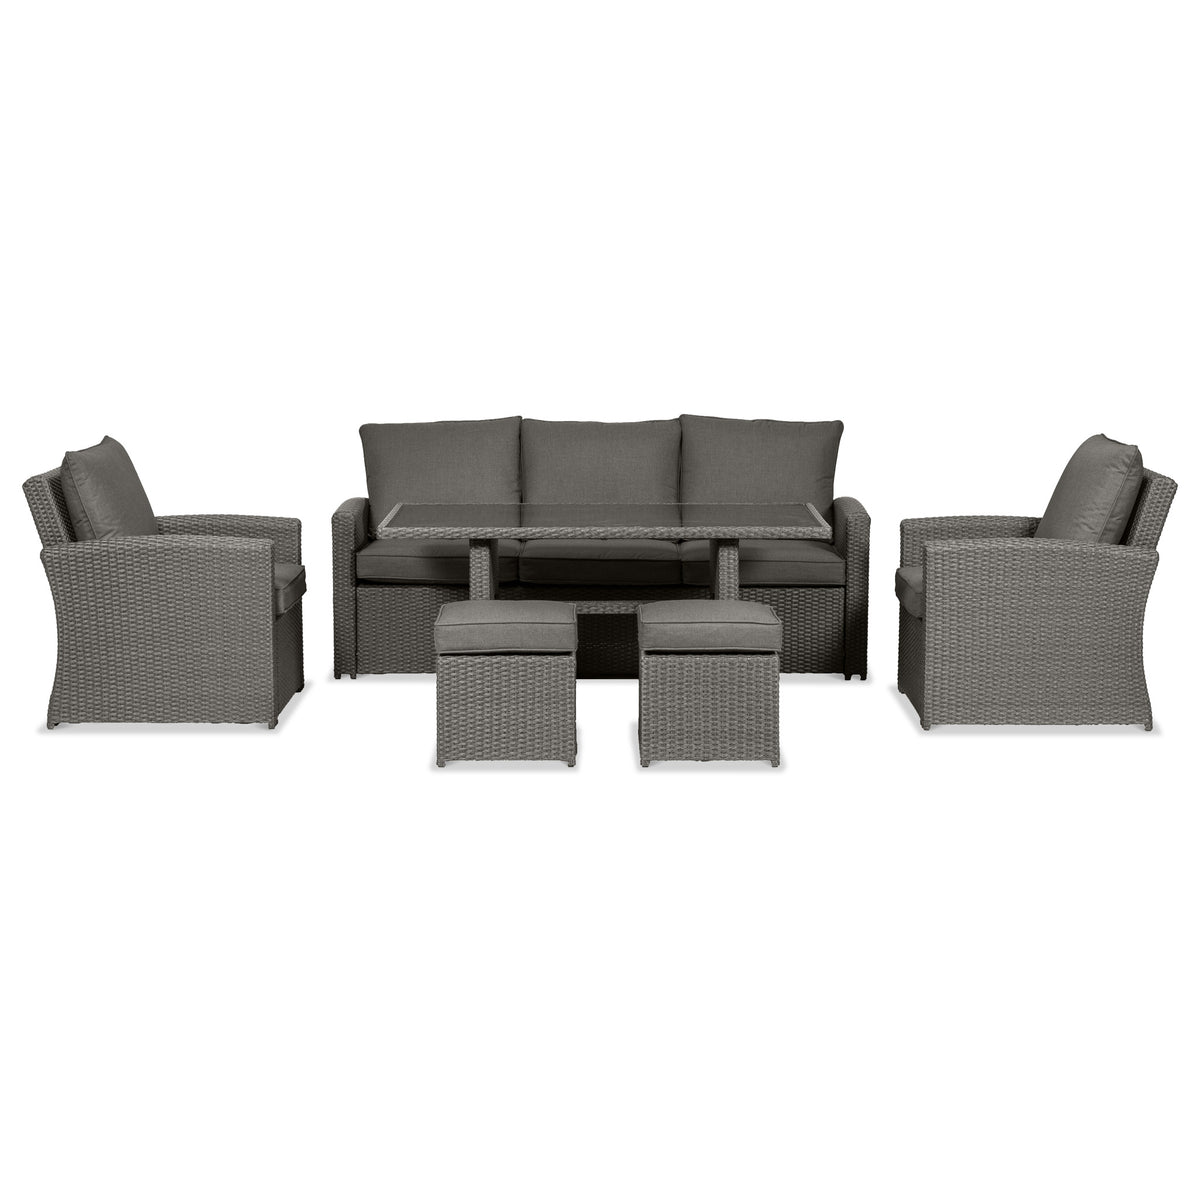 Paris Rattan Seven Seater Deluxe Sofa Dining Set from Roseland